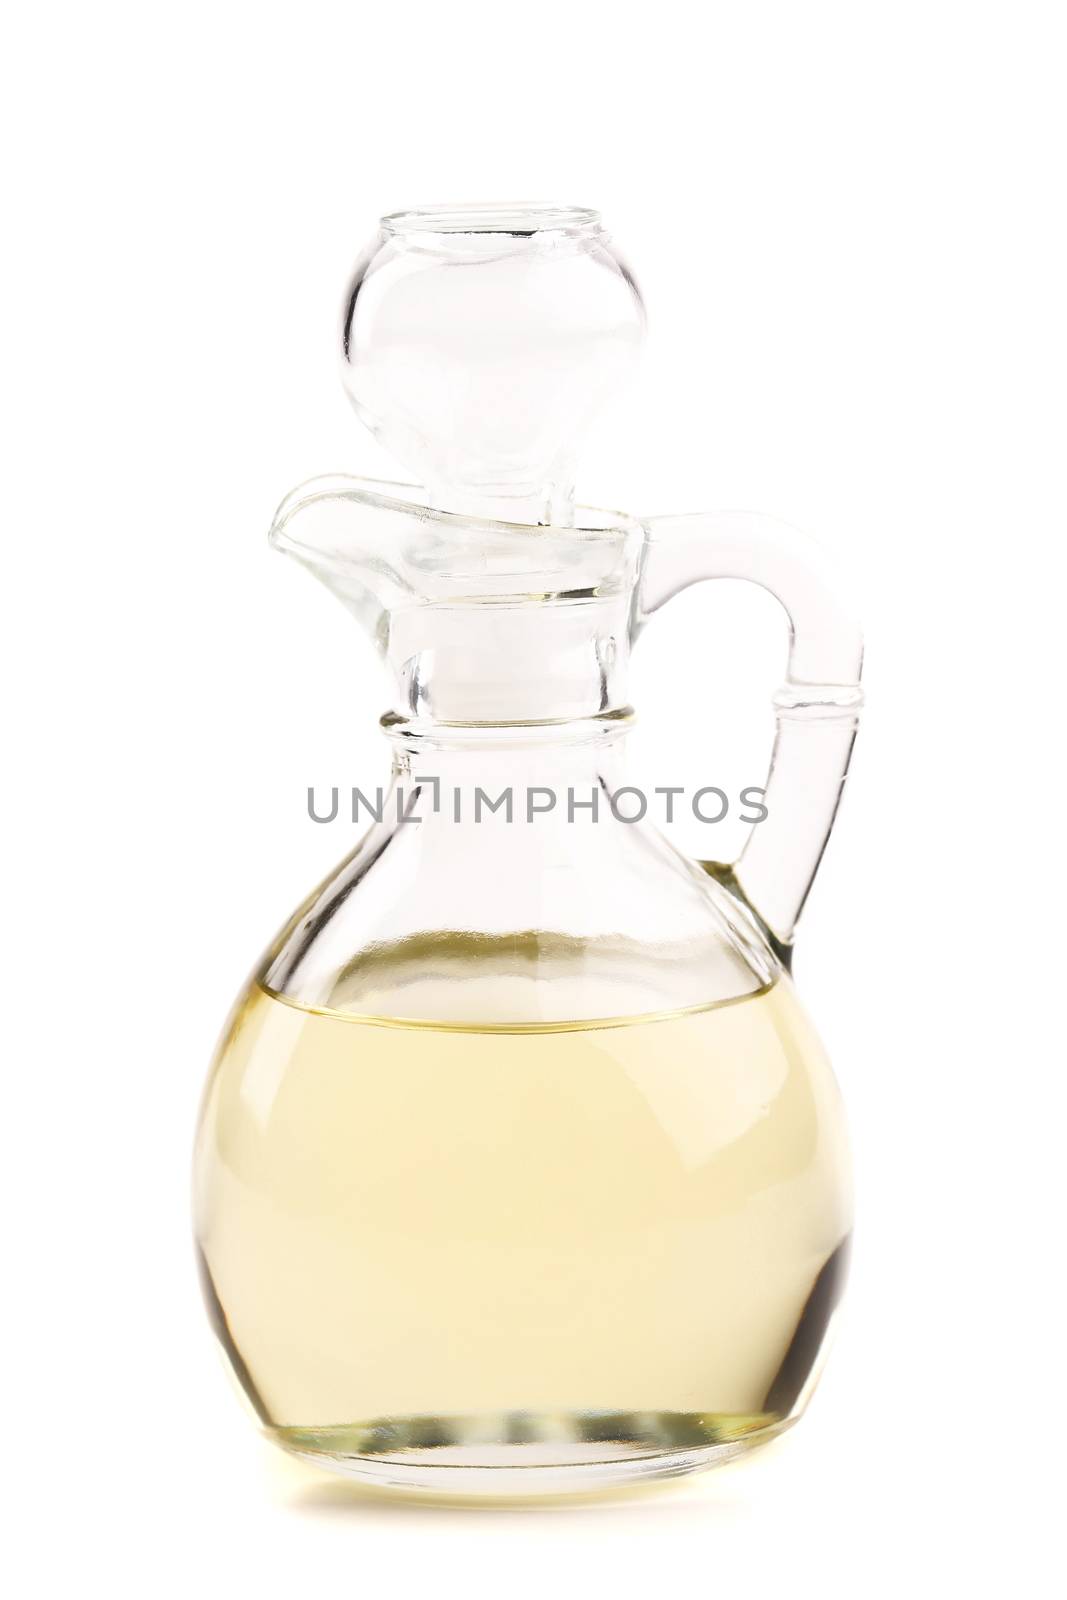 olive oil carafe closed on a white background